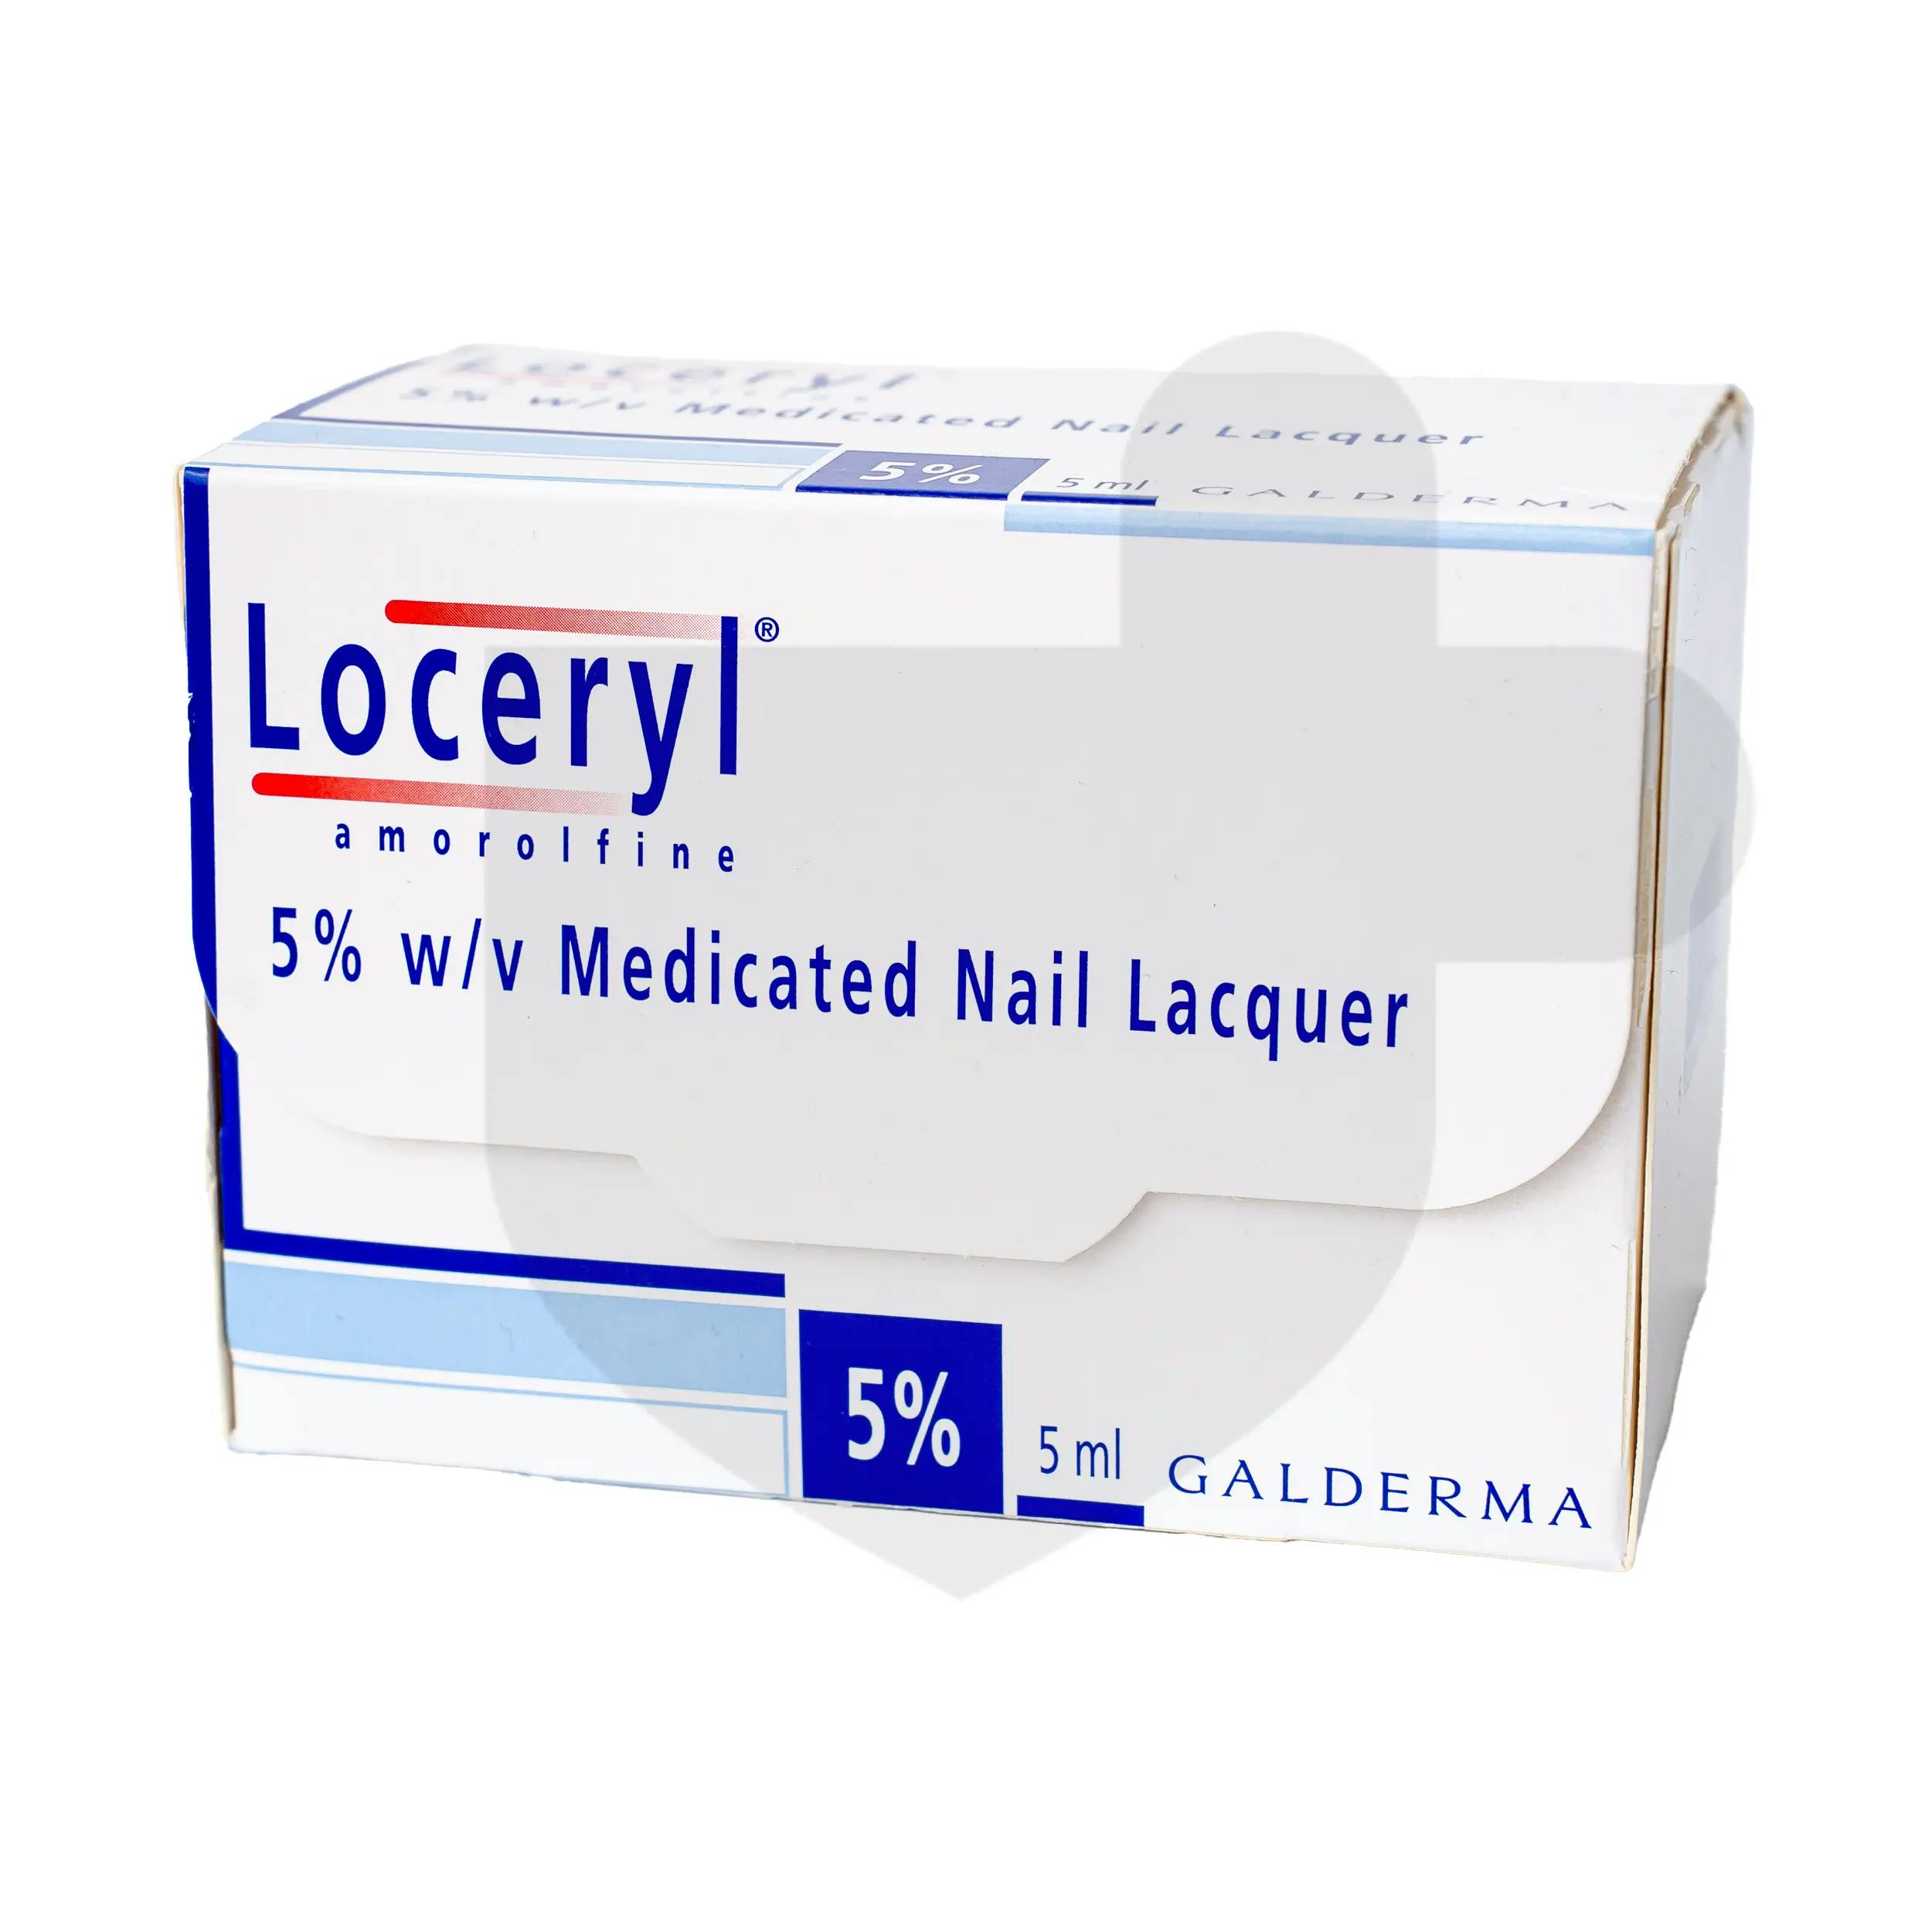 LOCERYL NAIL LACQUER <sup class="brand-mark">®</sup>